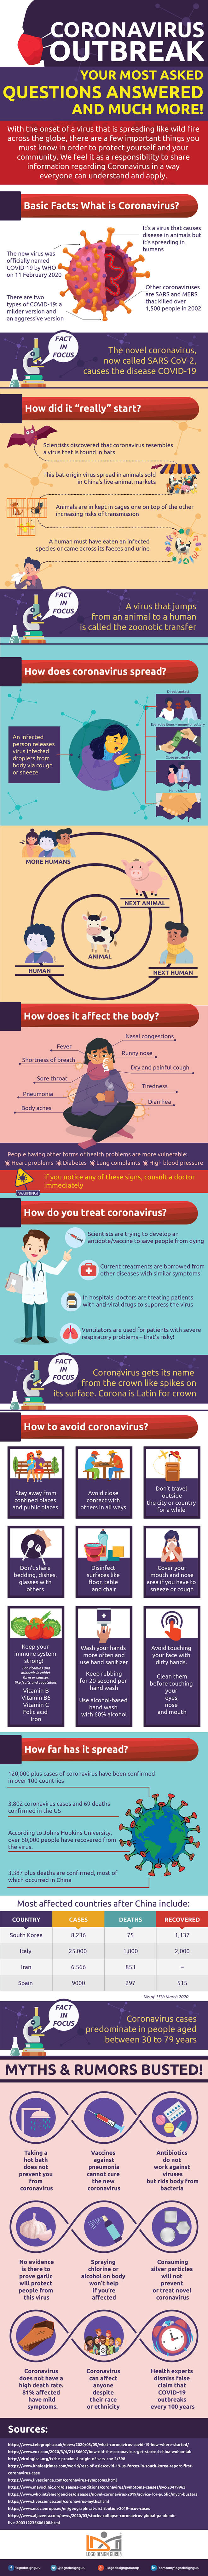 Coronavirus Outbreak: Your Most Asked Questions Answered